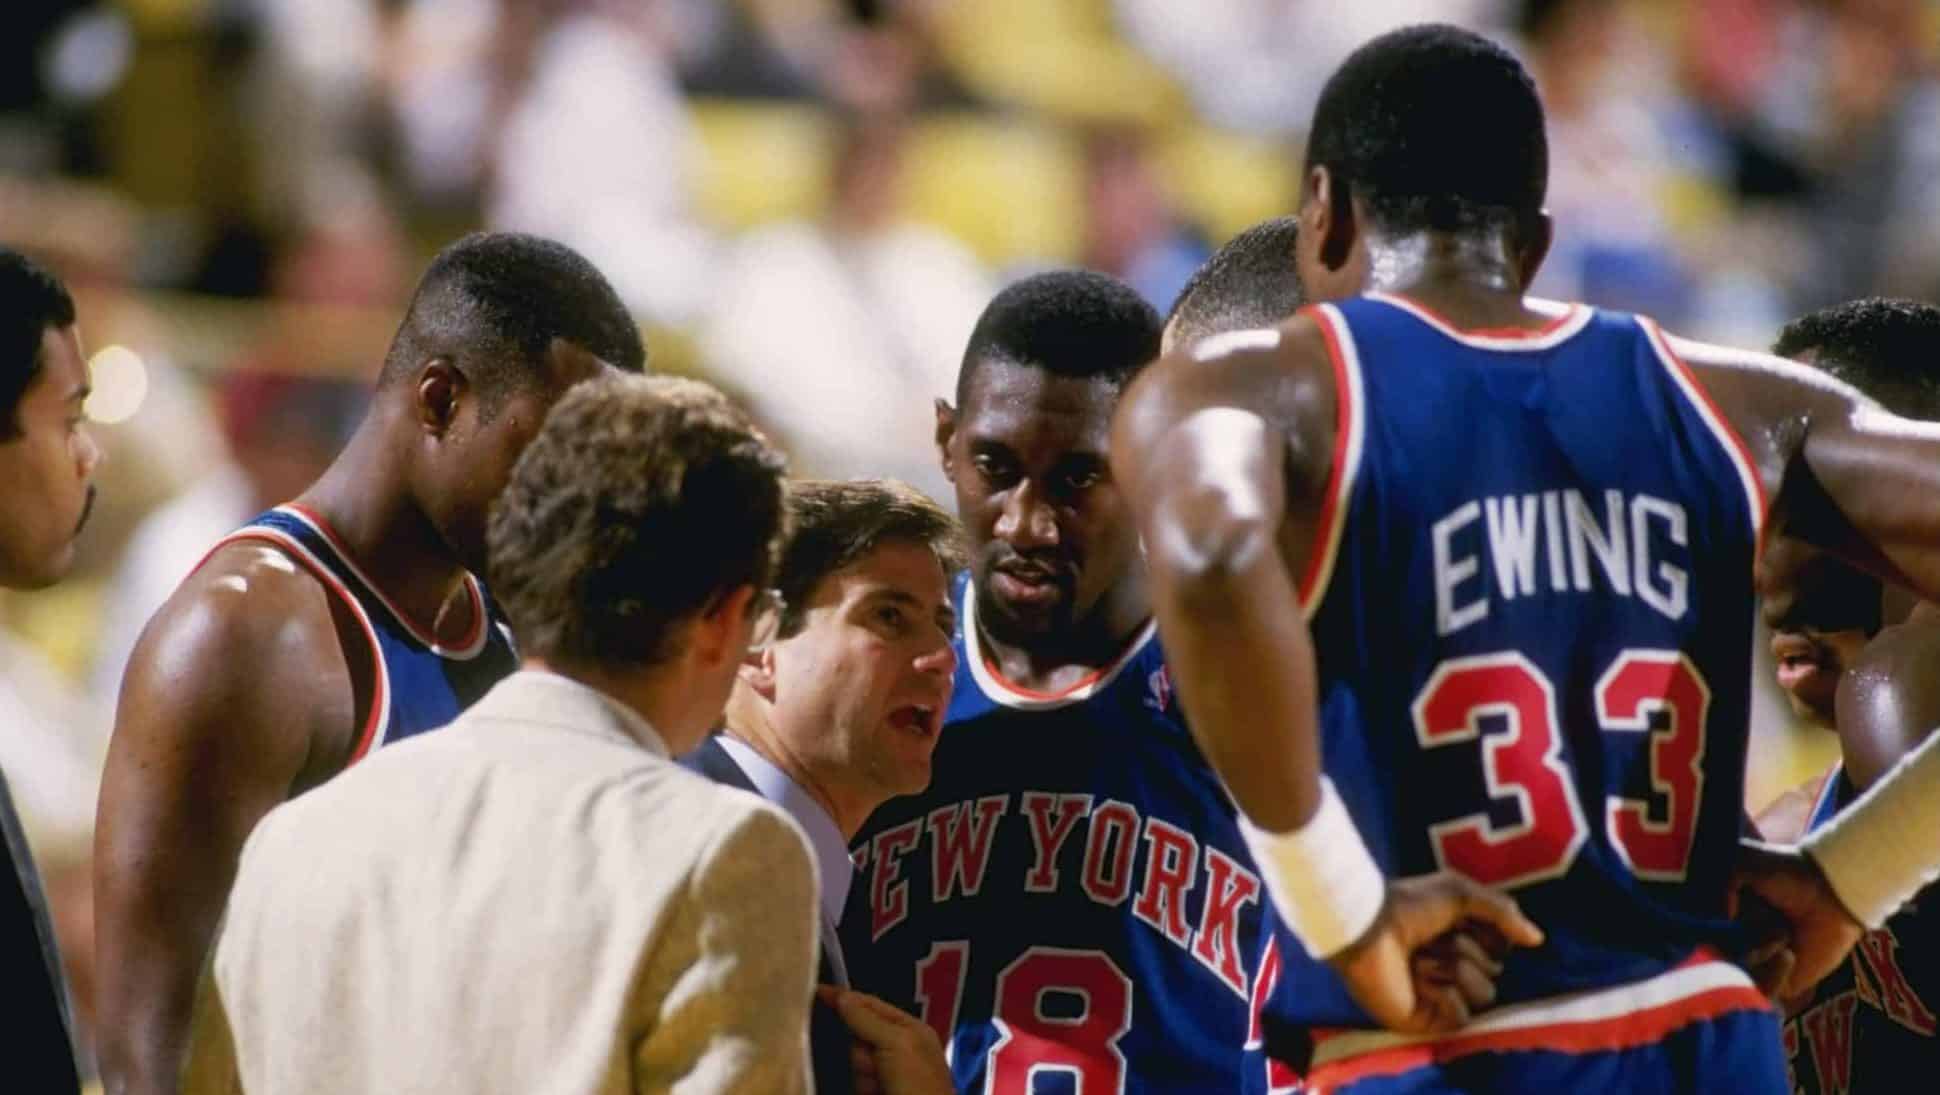 Oct 1987: Head coach Rick Pitino of the New York Knicks talks to Patrick Ewing #33 and other teammates during a Knicks versus Los Angeles Lakers game at the Great Western Forum in Inglewood, California.